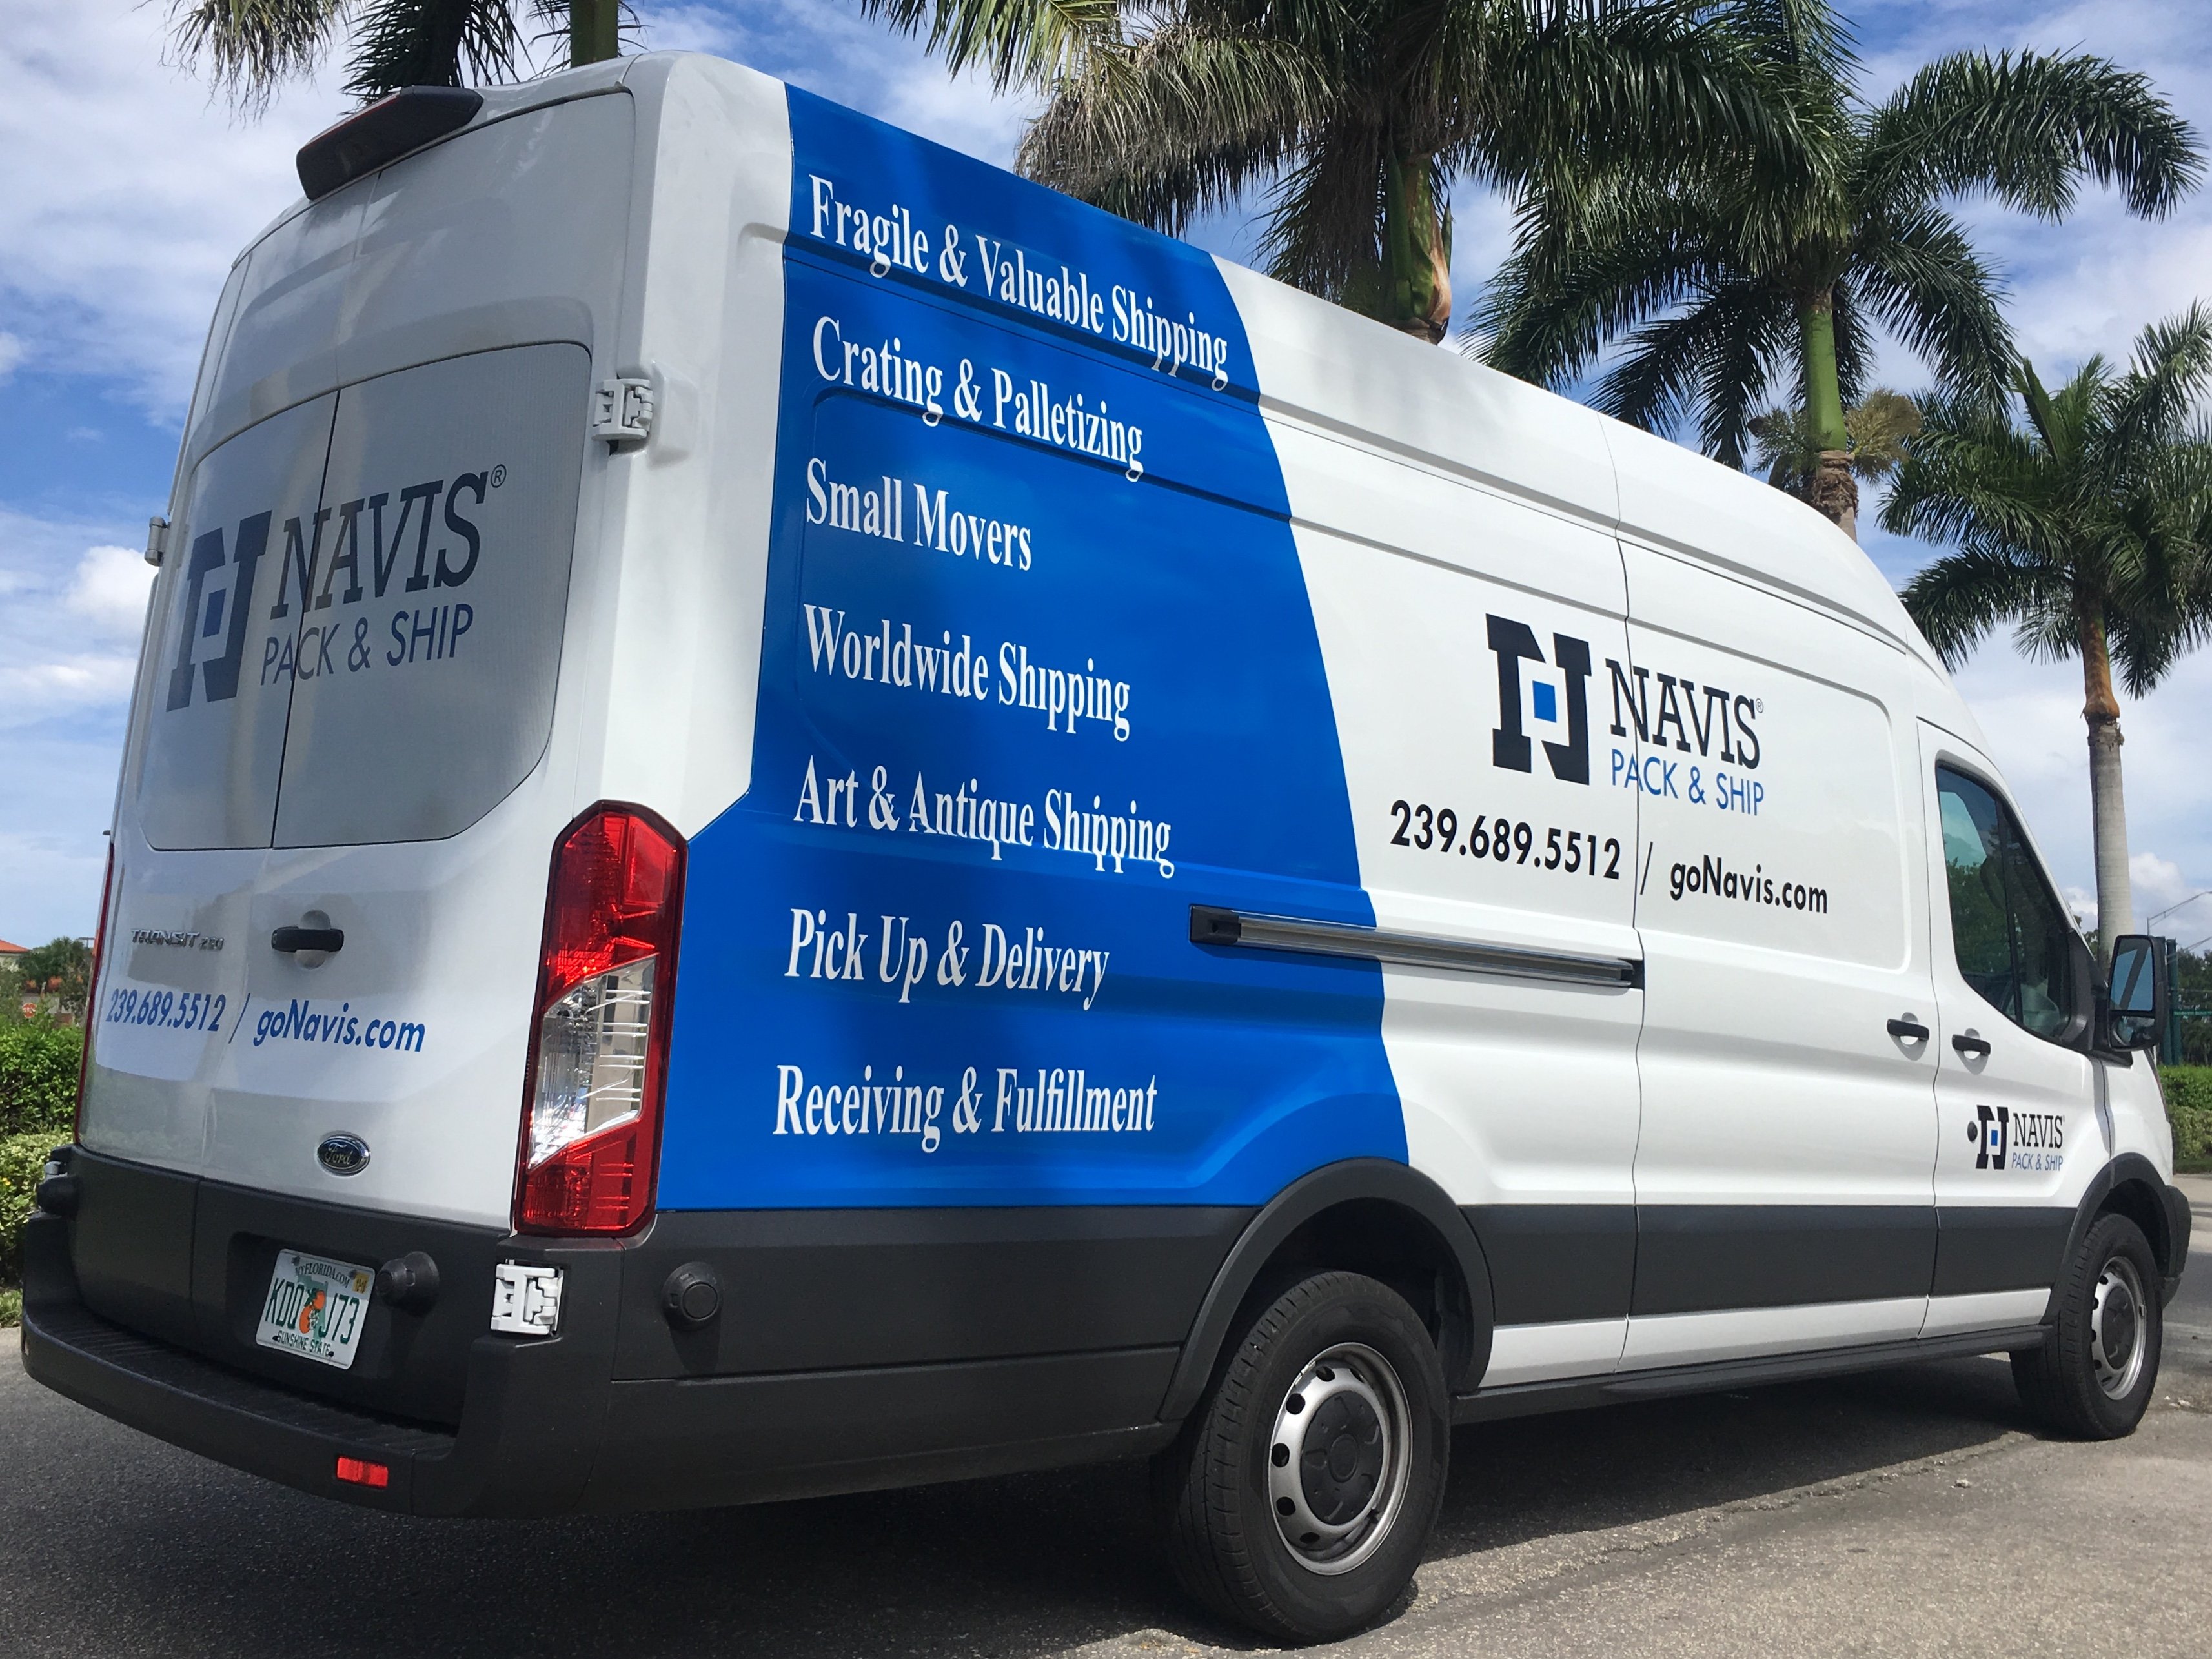 Pack and Ship Services in Fort Myers, Cape Coral, Boca Grande, Estero and South Florida